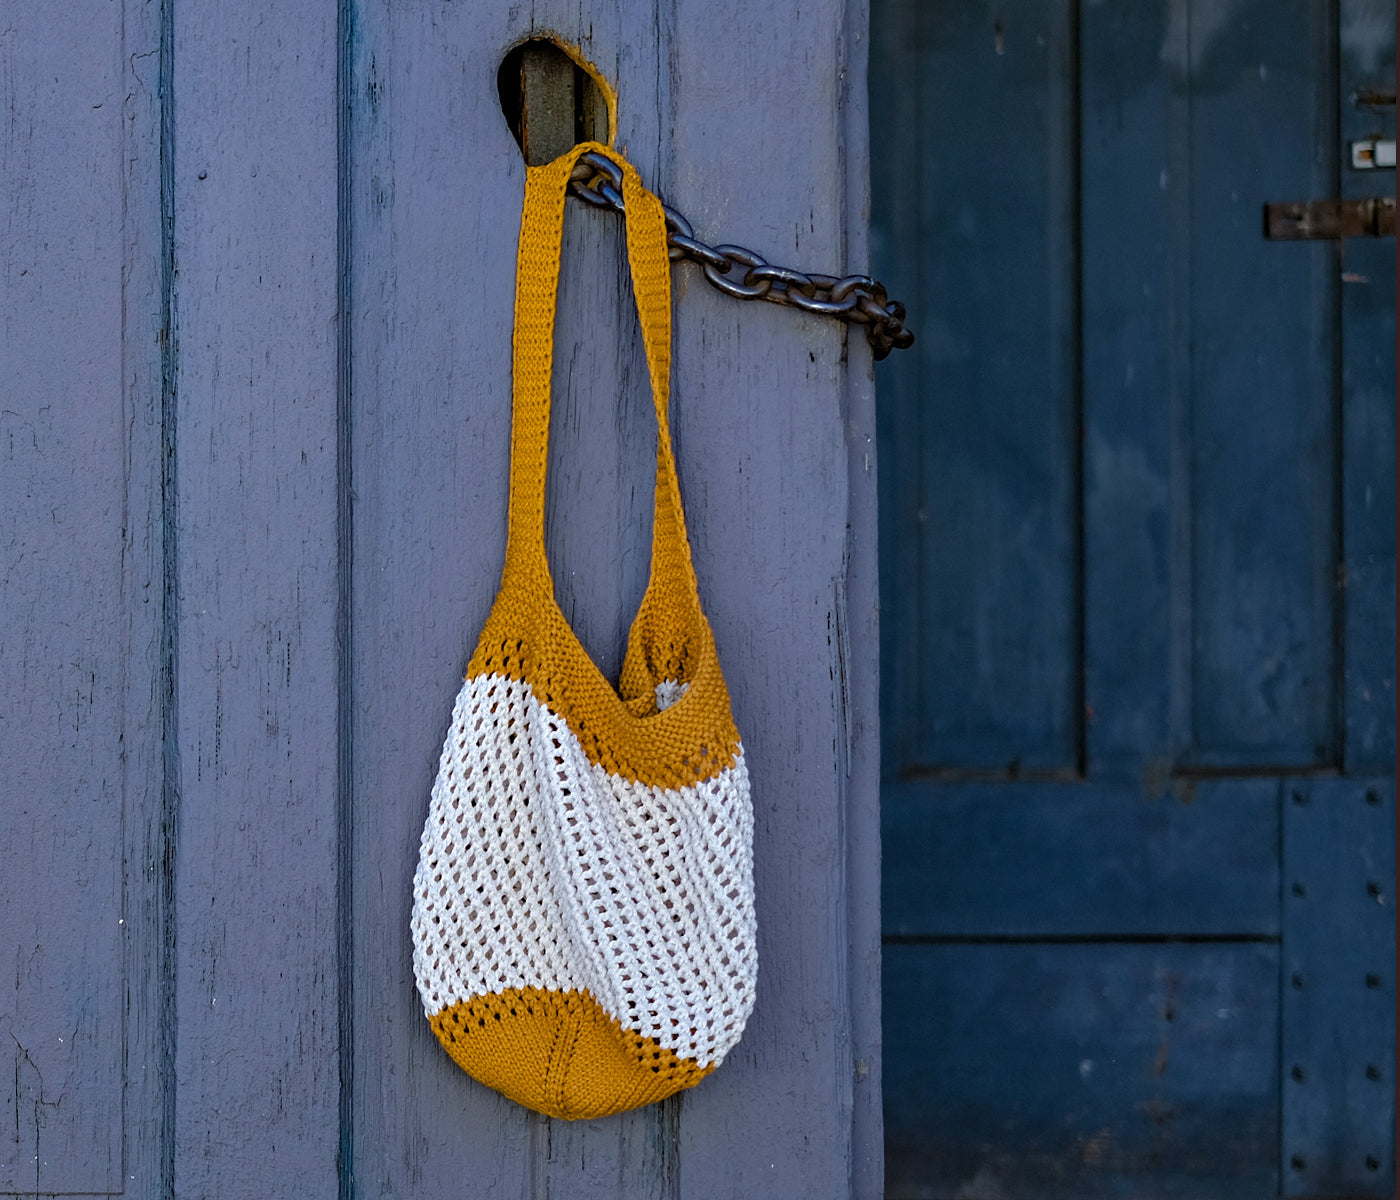 Rae's eco-friendly market bag made with recycled fiber yarn